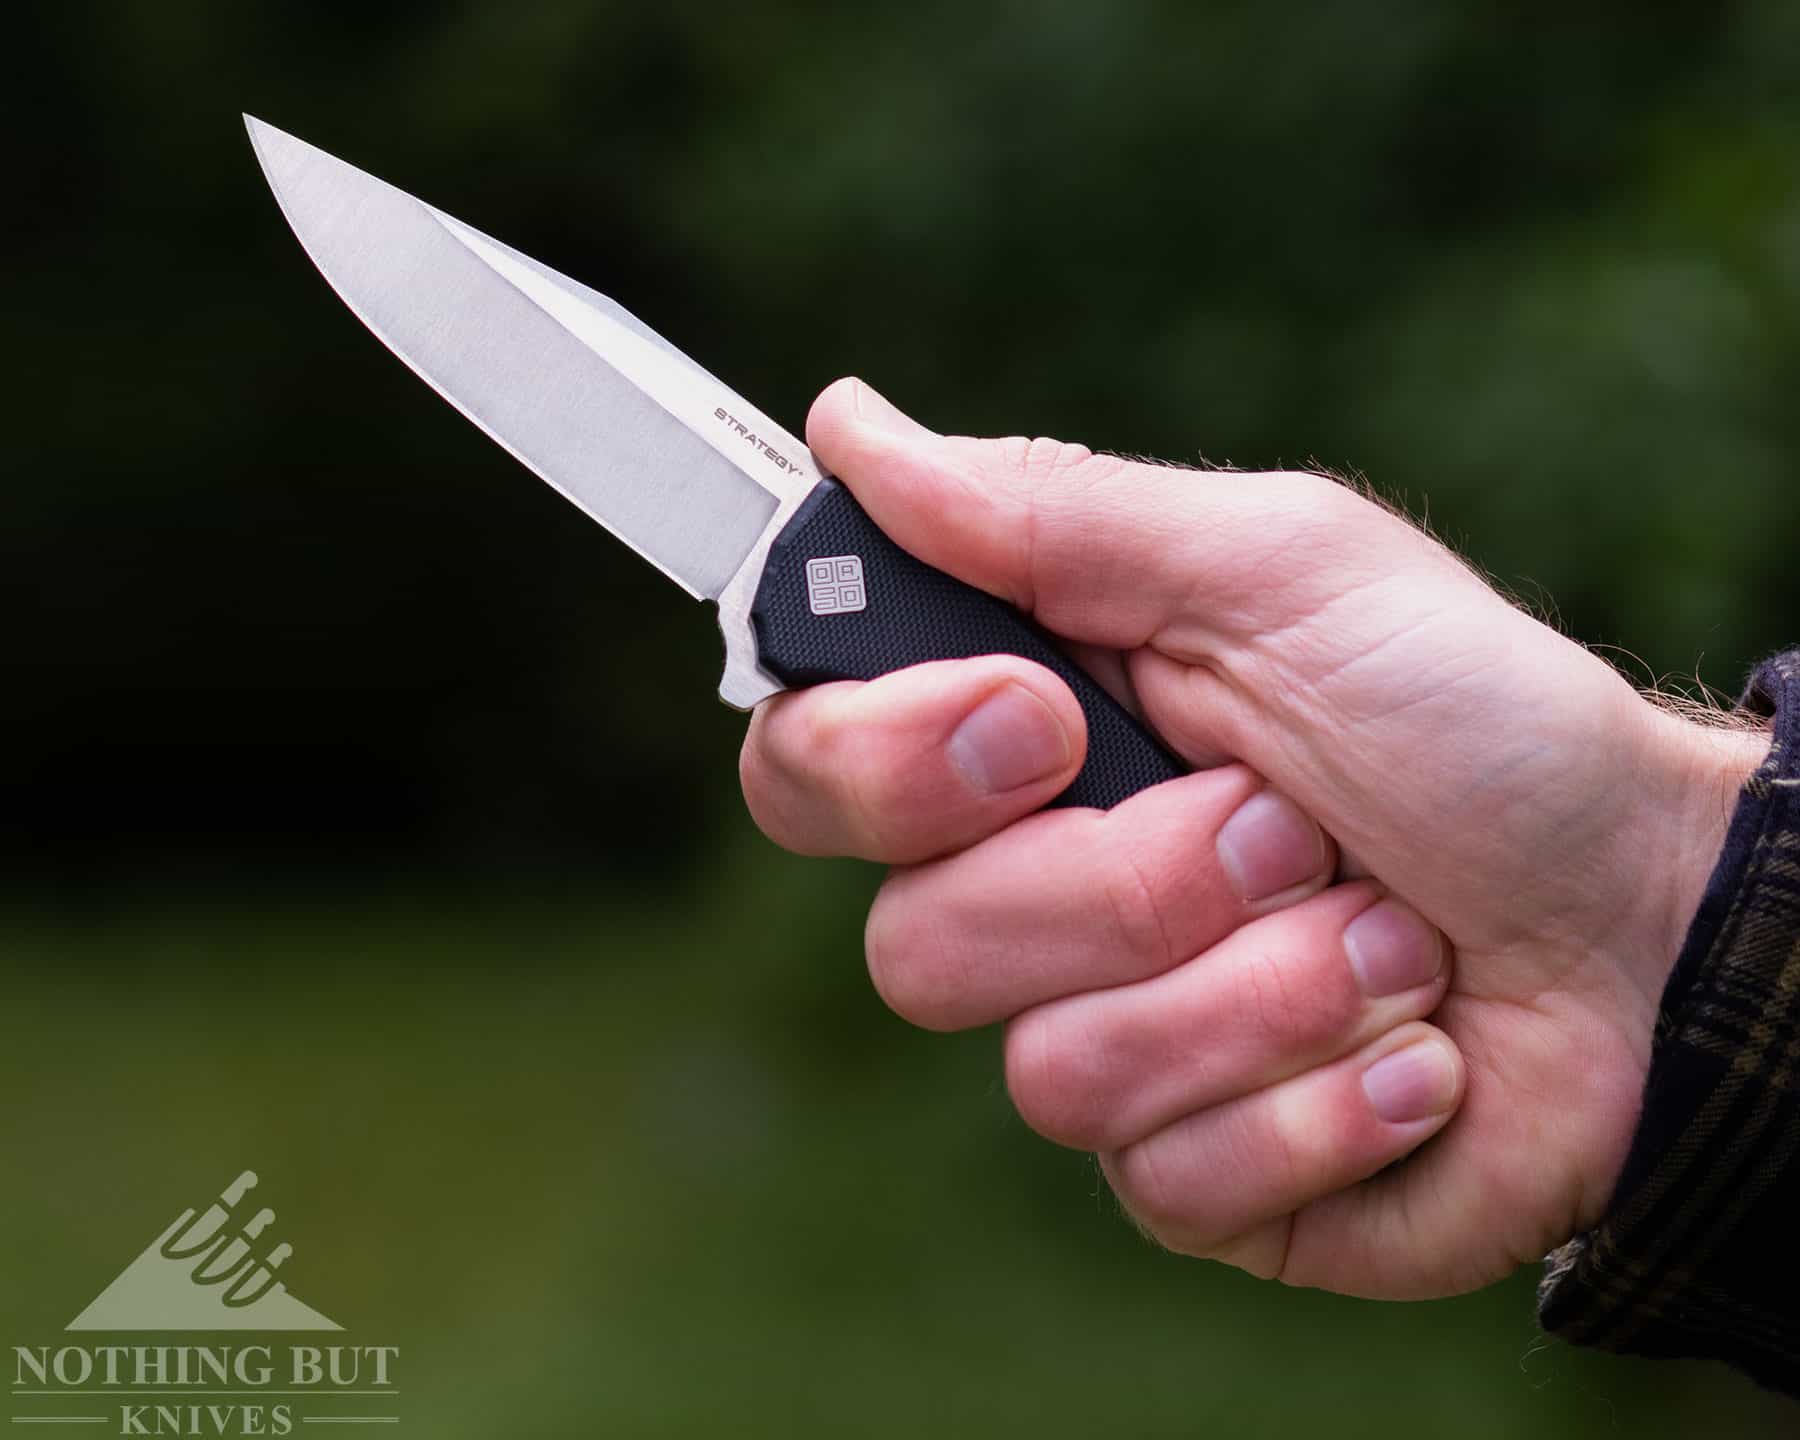 The Strategy is not  large knife, but the ergonomic handle accommodates four fingers well. 